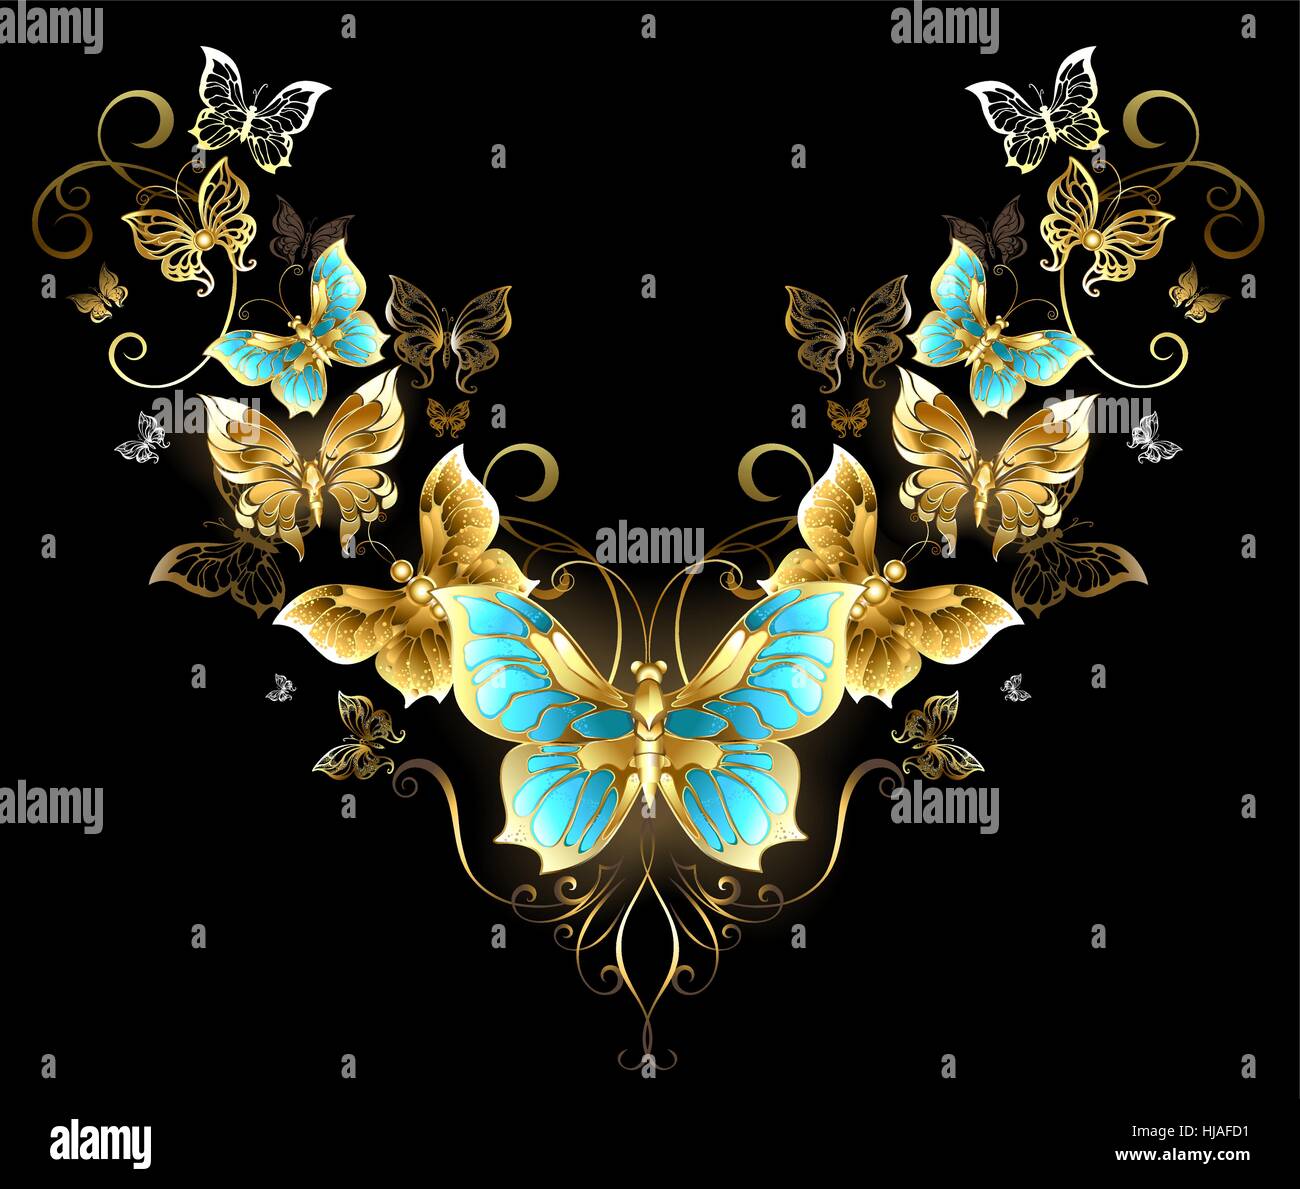 Symmetrical pattern of gold jewelry butterflies on a black background. Golden Butterfly. Design with butterflies. Stock Vector